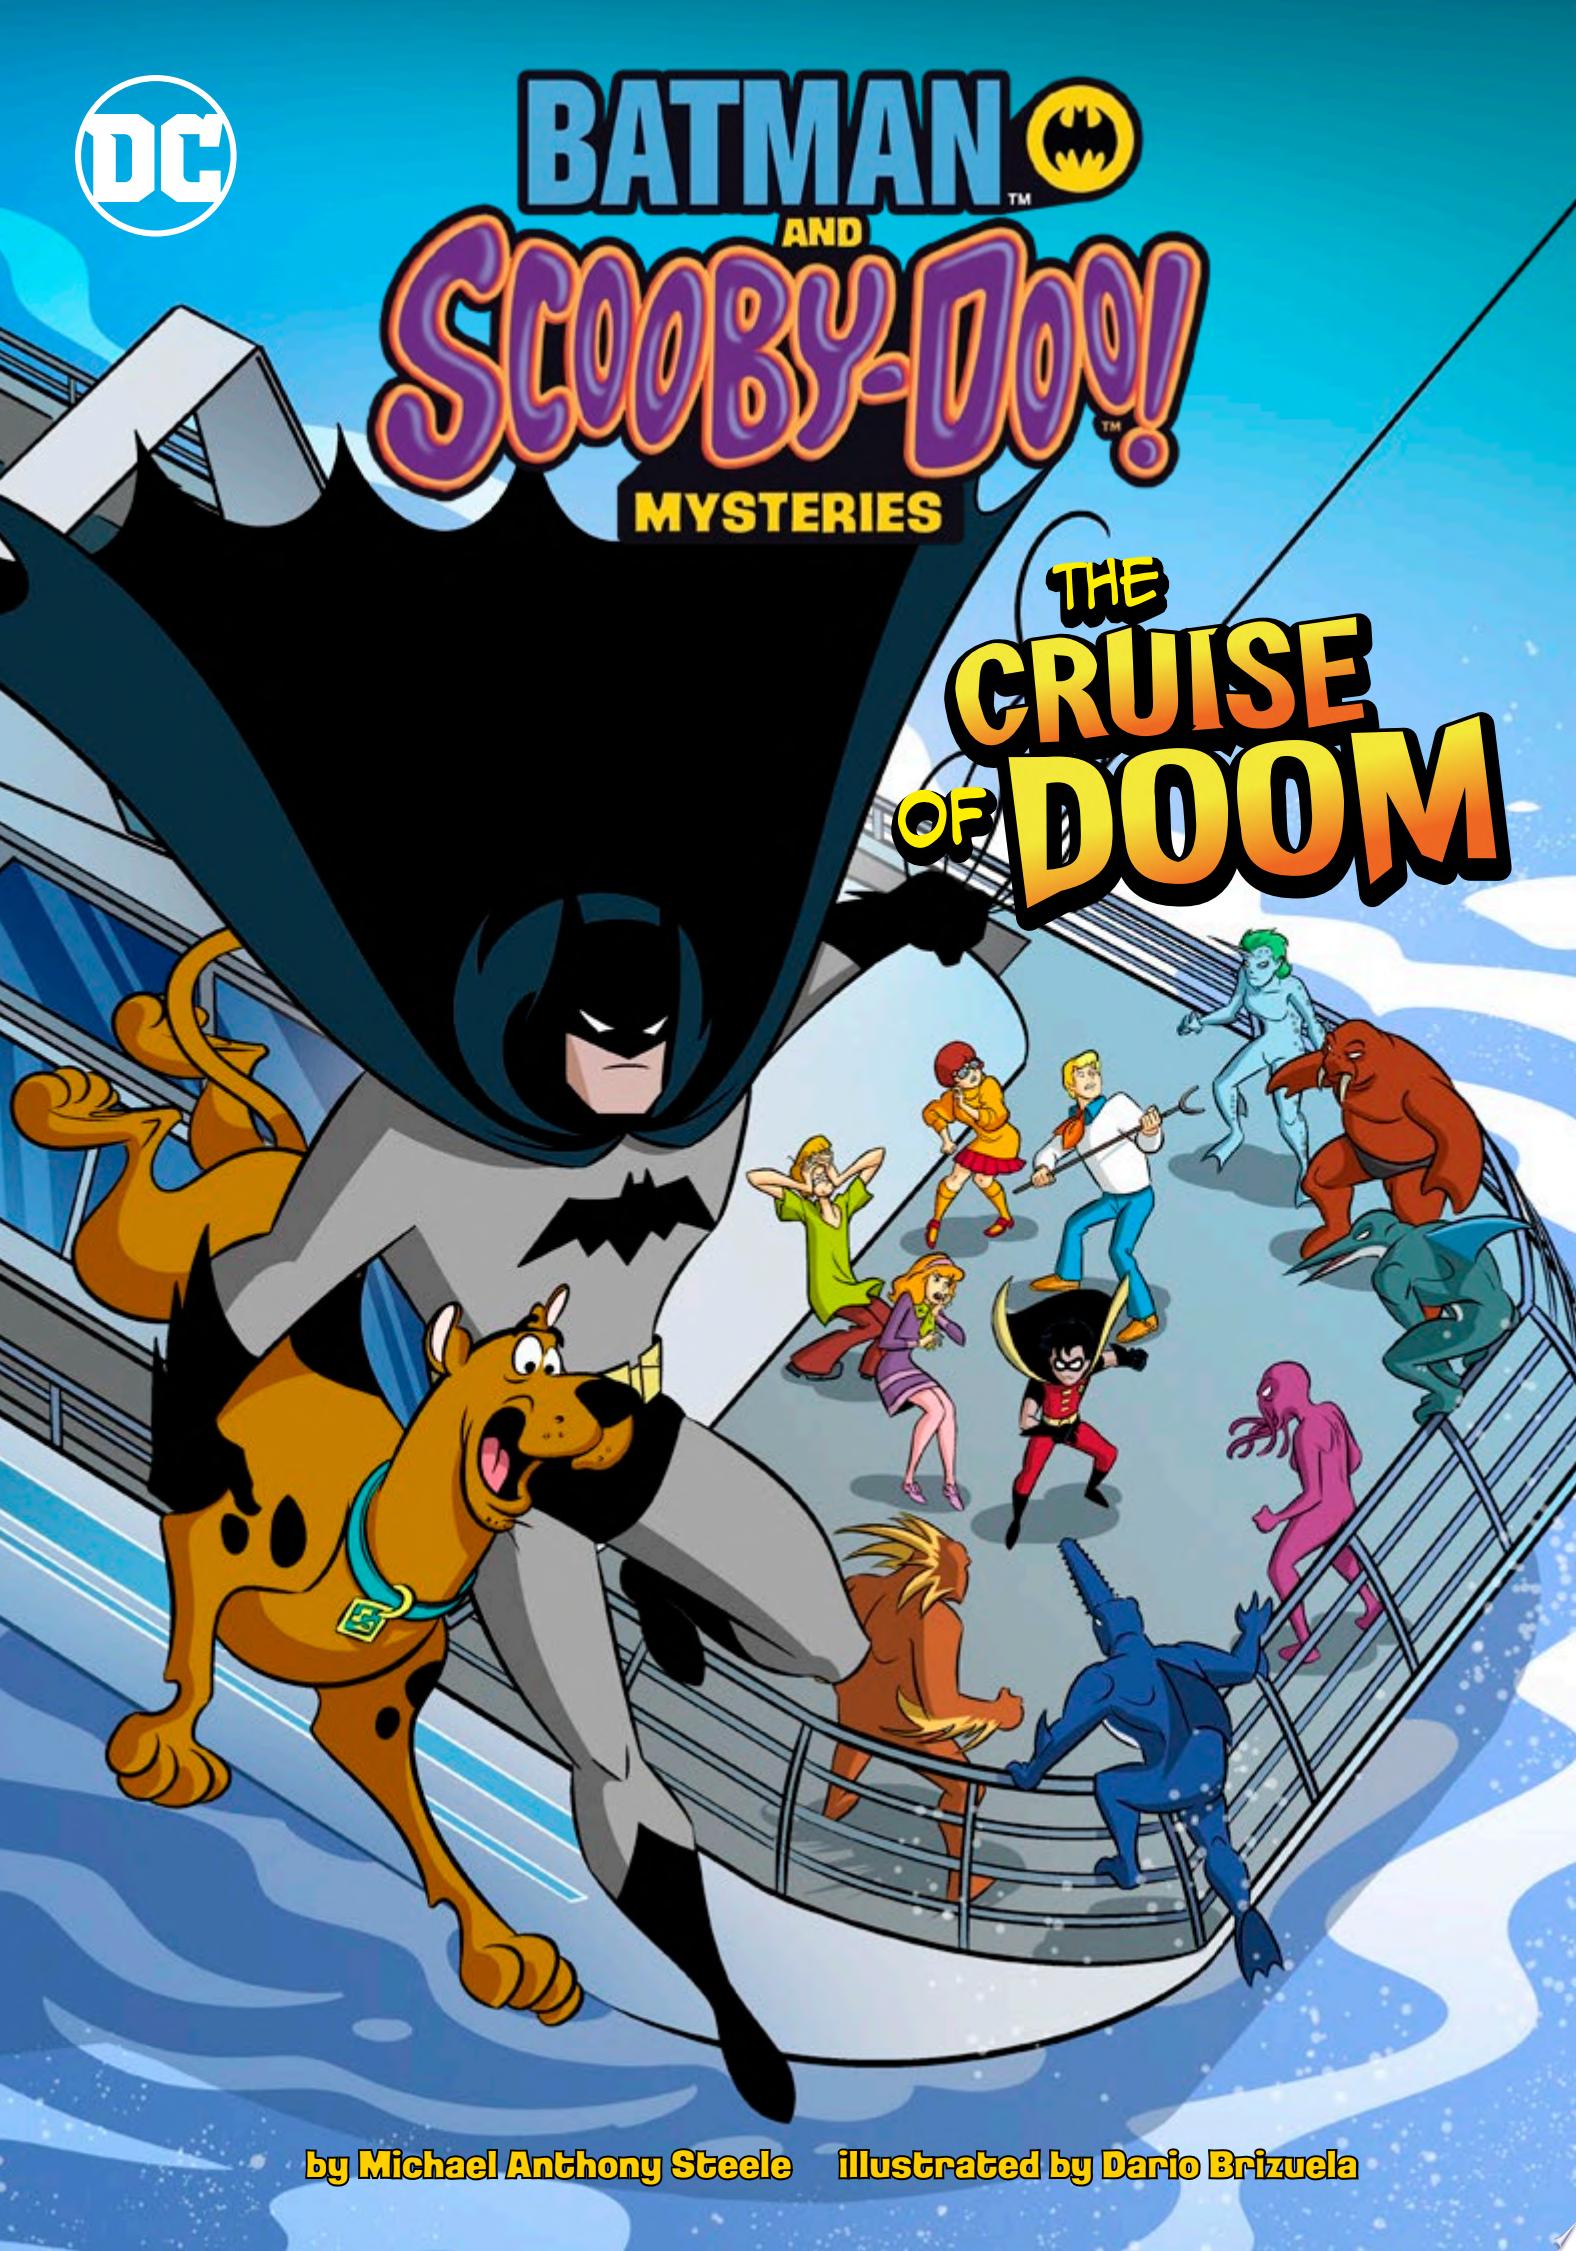 Image for "The Cruise of Doom"